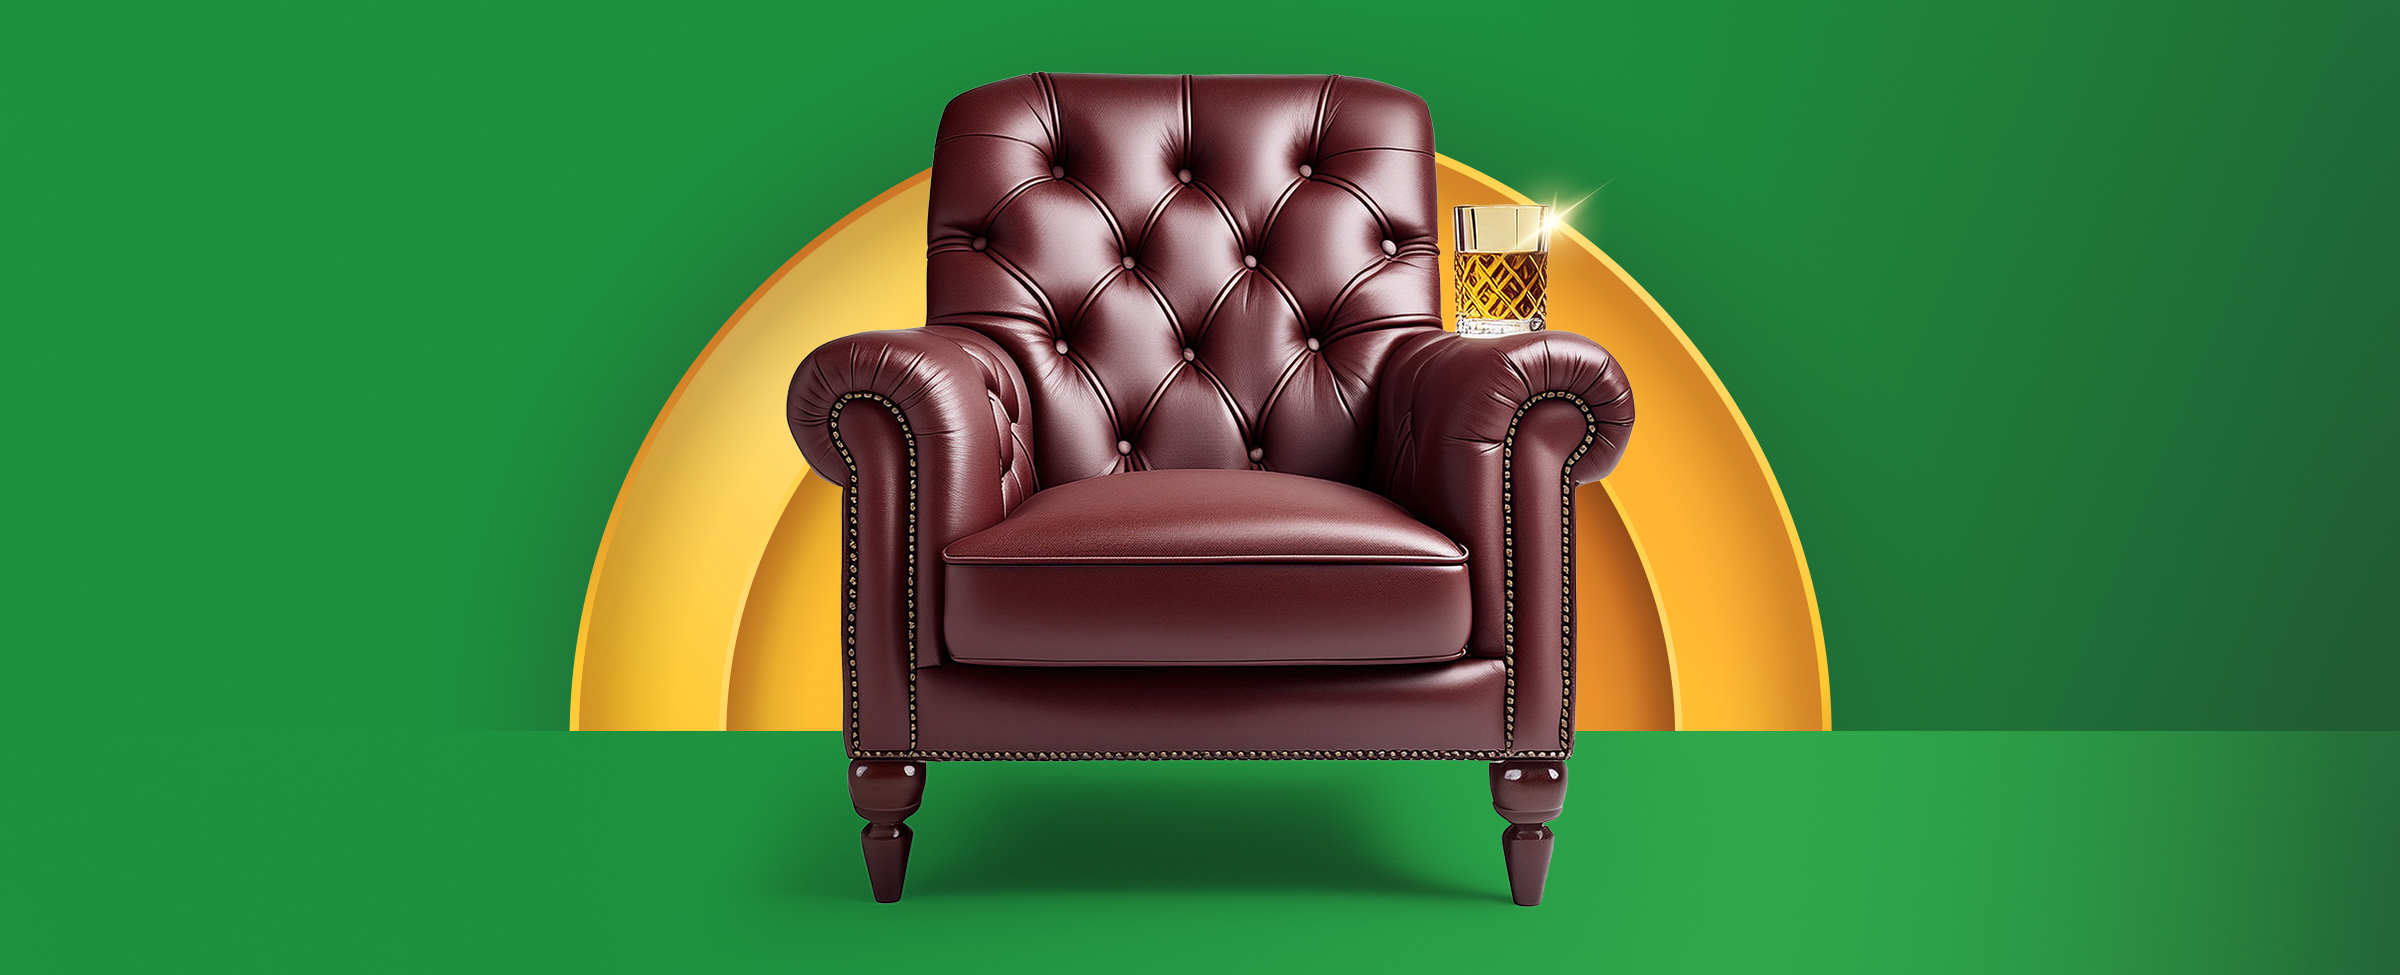 A stylish brown leather chair has a glass of an alcoholic spirit on the arm of it. On a vibrant green background.